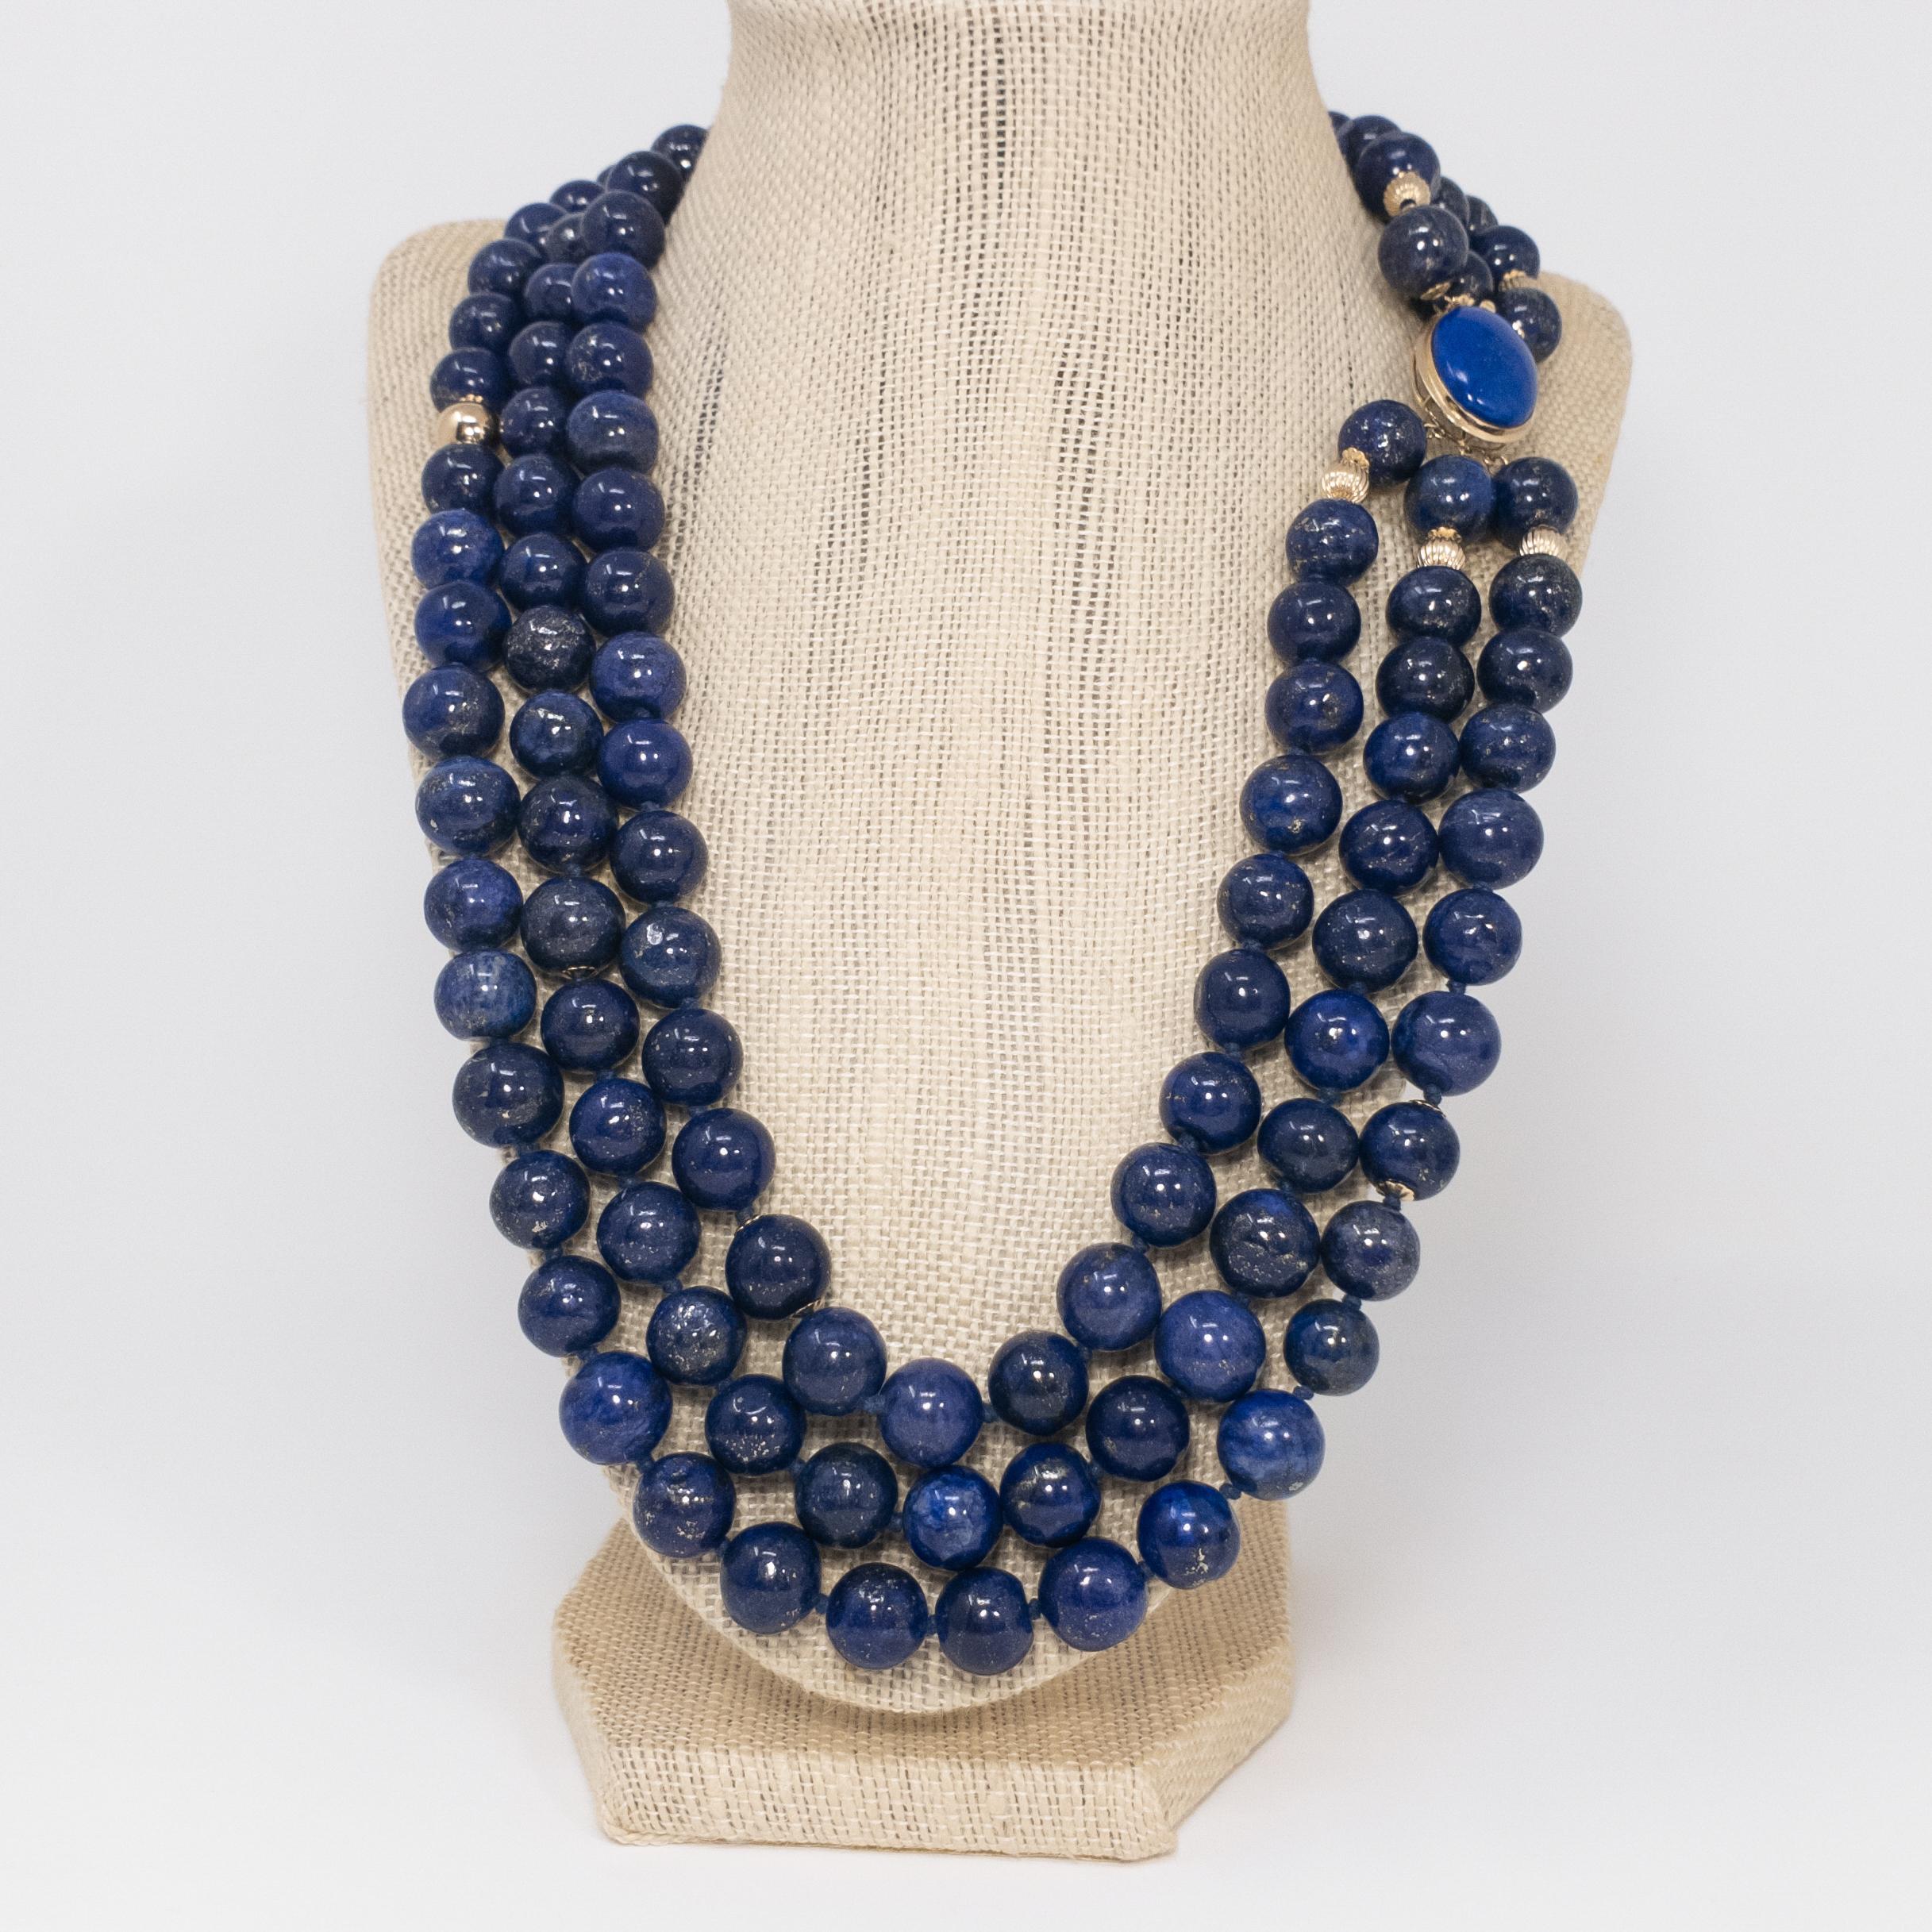 A striking and sophisticated triple-strand lapiz lazuli necklace. Each strand features genuine lapis lazuli beads, decorated with14 karat yellow gold beads and accents. The necklace is connected with a stunning 14K yellow gold, lapiz lazuli cabochon